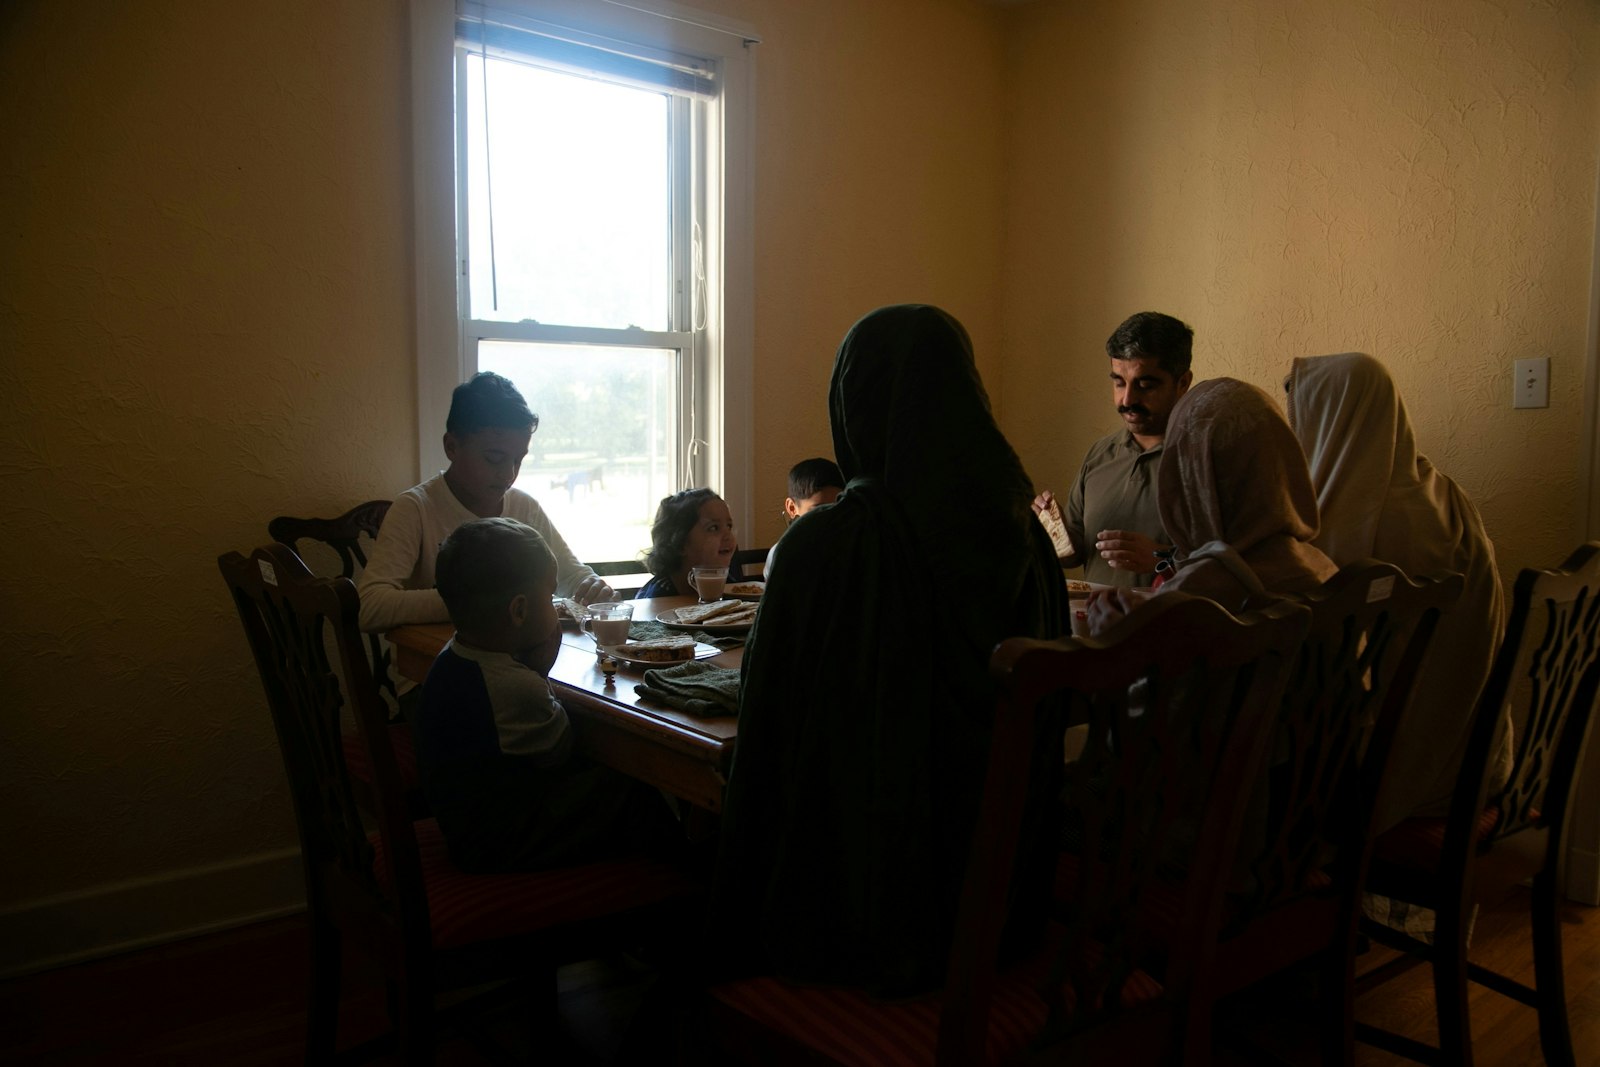 An Afghan refugee family eats breakfast in Bowling Green, Ky., Nov. 2021. (CNS photo/Amira Karaoud, Reuters)